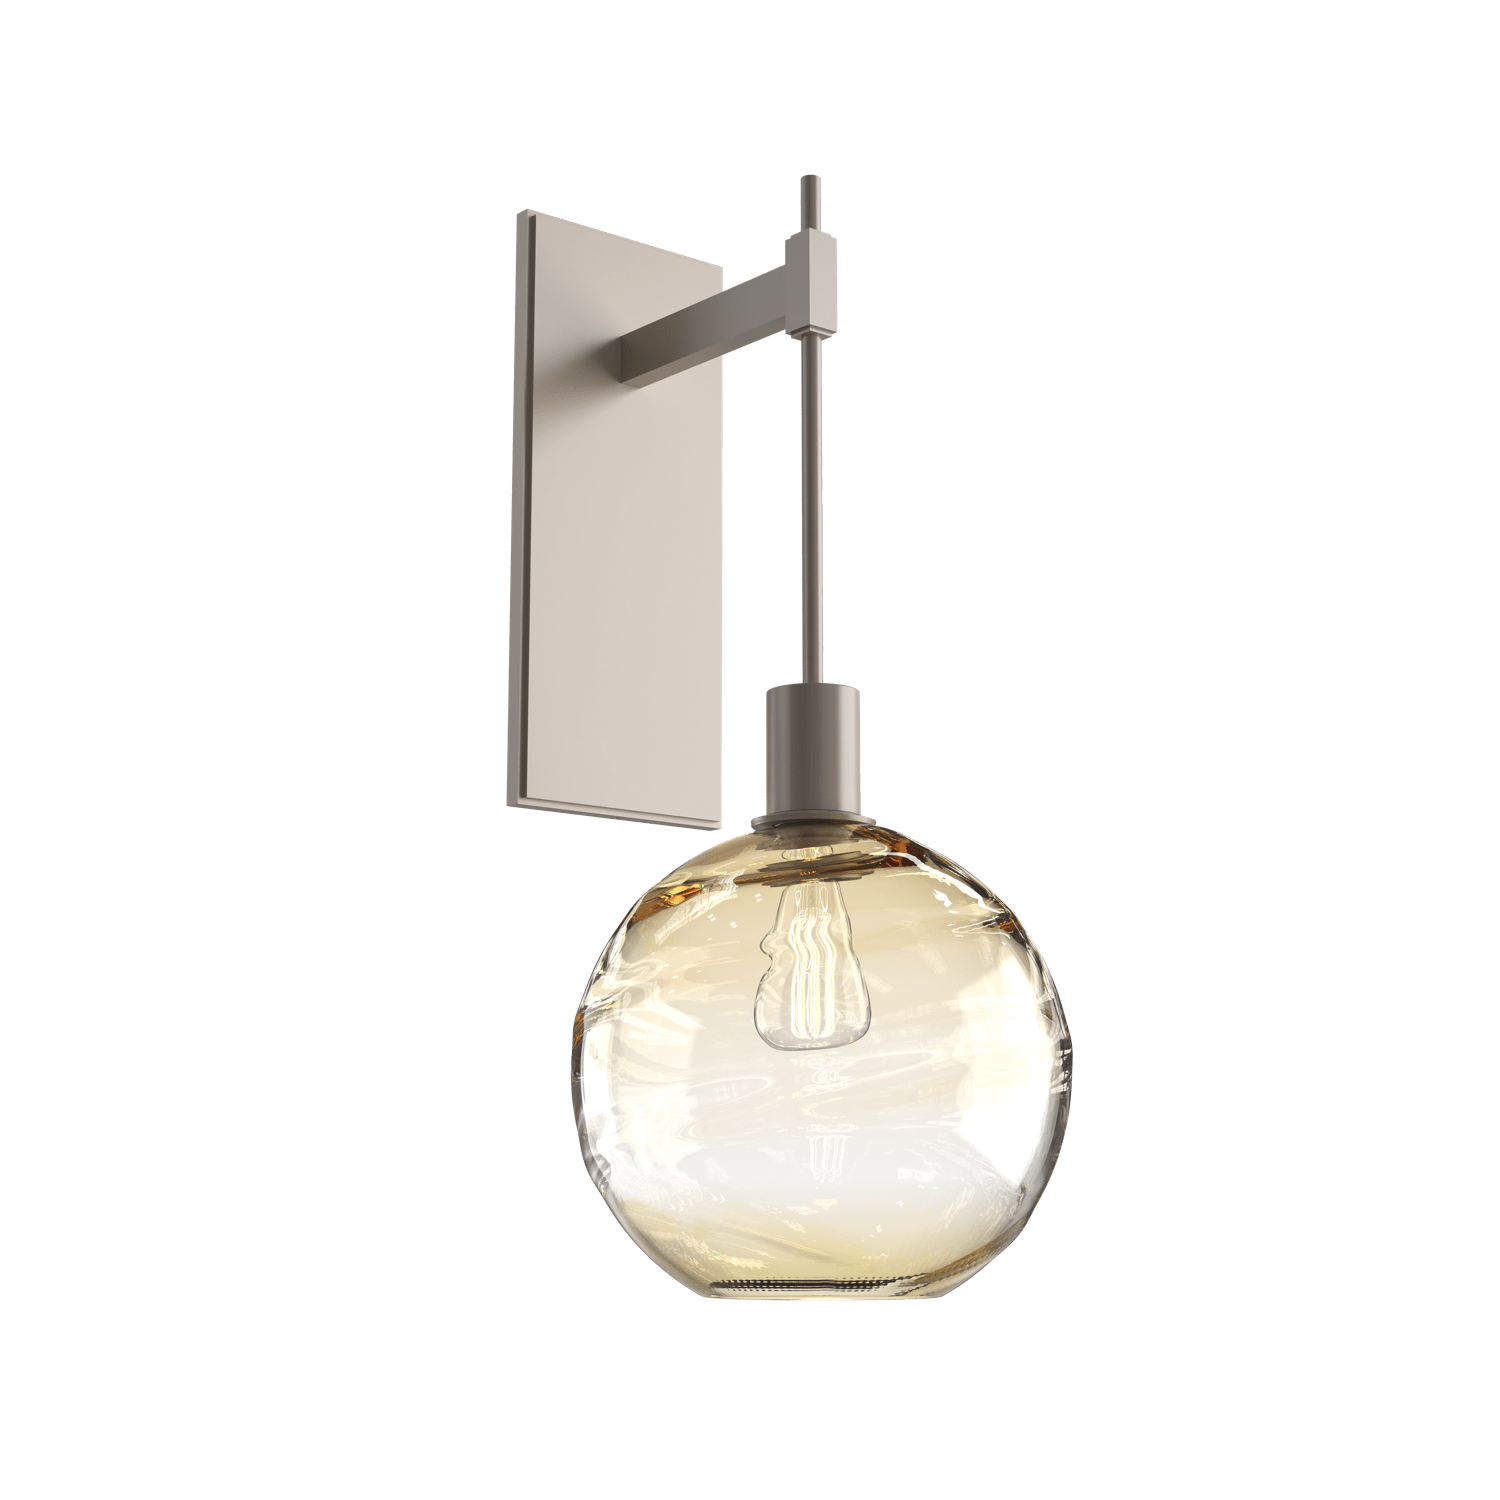 IDB0047-22-BS-OA-Hammerton-Studio-Optic-Blown-Glass-Terra-tempo-wall-sconce-with-metallic-beige-silver-finish-and-optic-amber-blown-glass-shades-and-incandescent-lamping